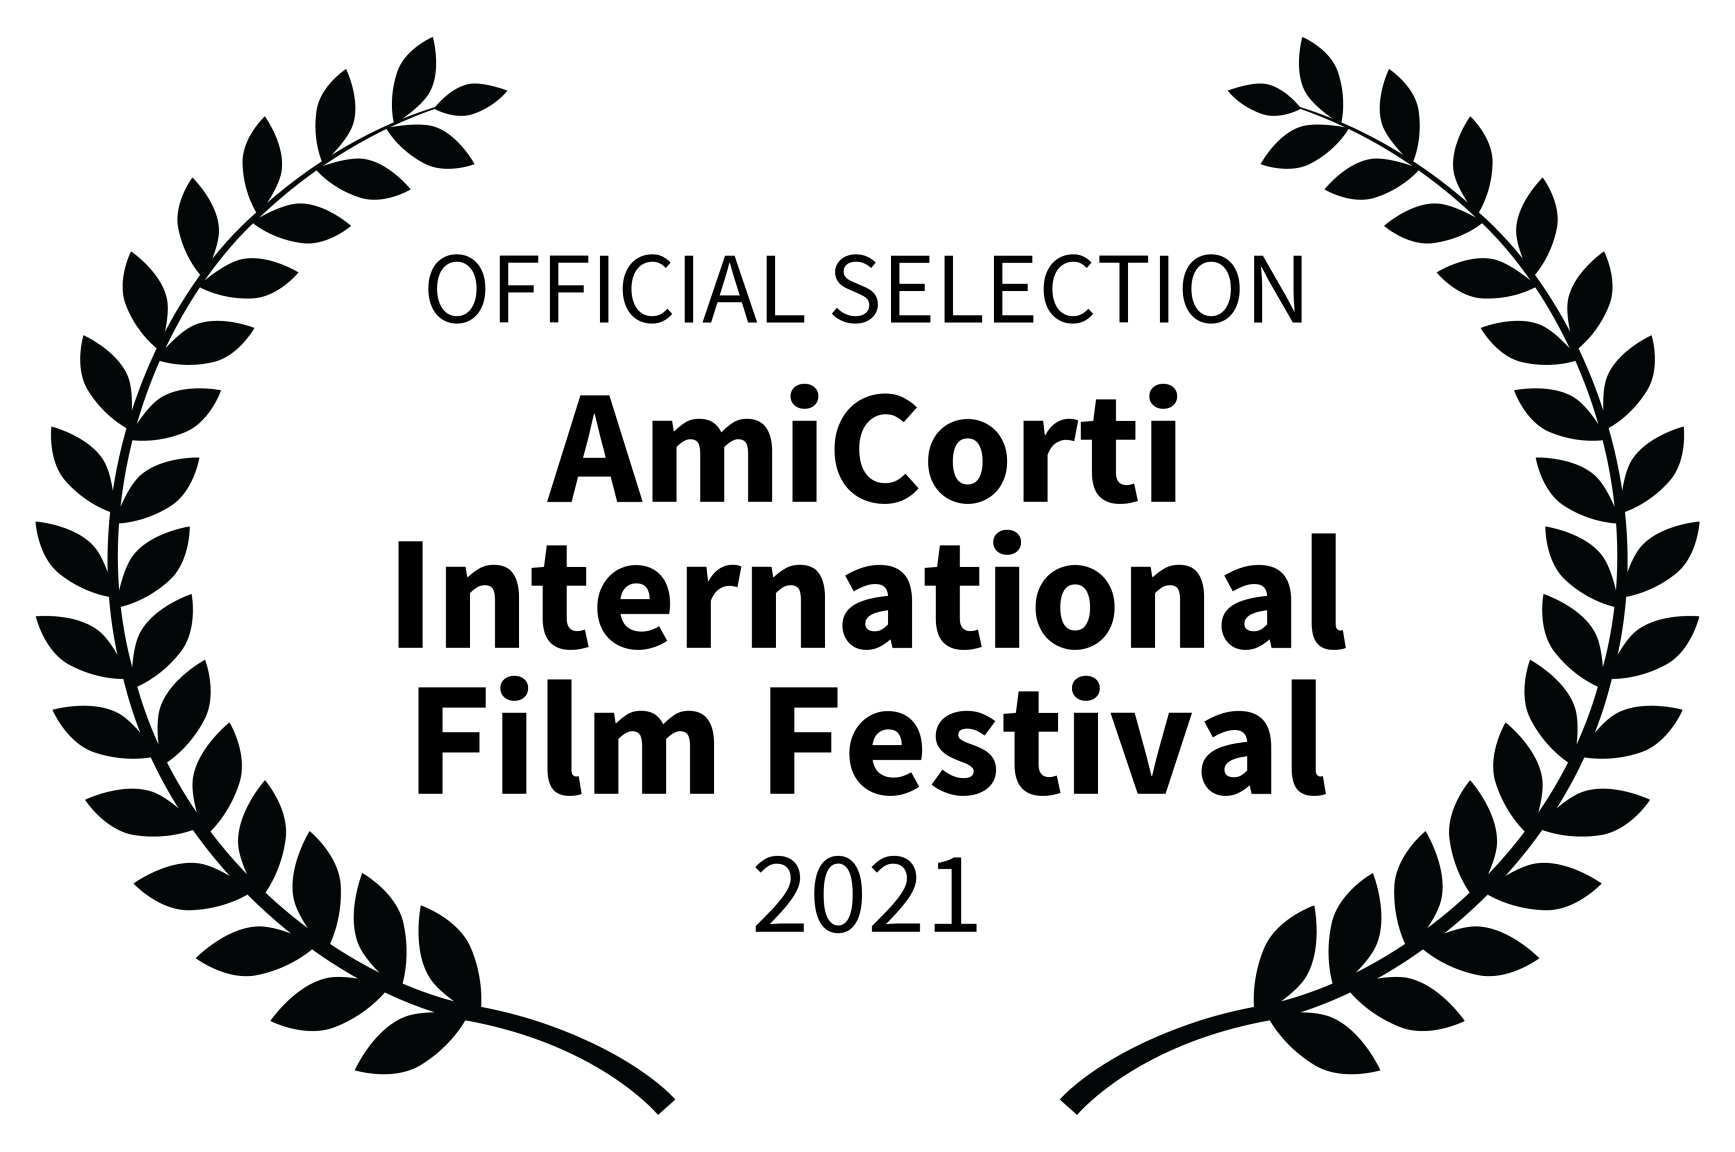 OFFICIAL SELECTION – AmiCorti International Film Festival – 2021